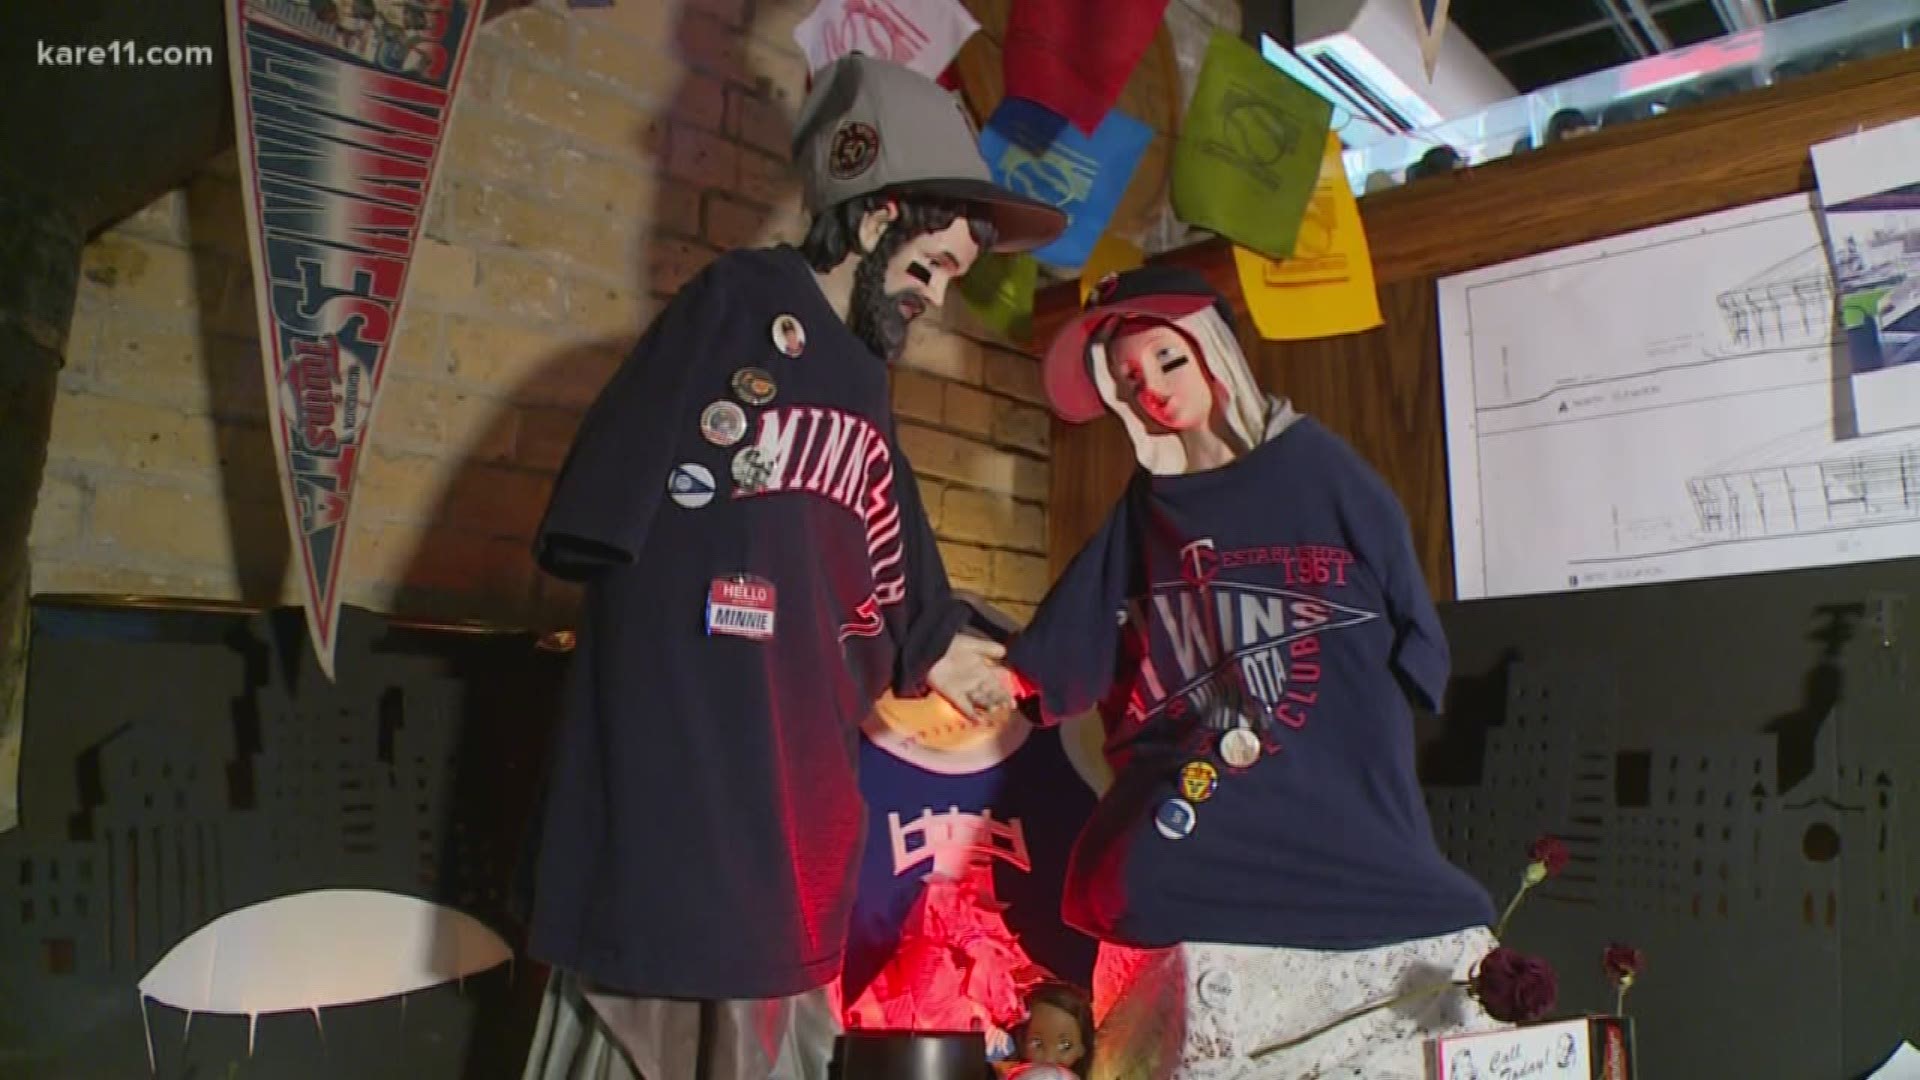 The Twins' recent winning ways coincide with the creation of a shrine to the team at Darby's Pub in the North Loop, and organizers say it's not by accident.